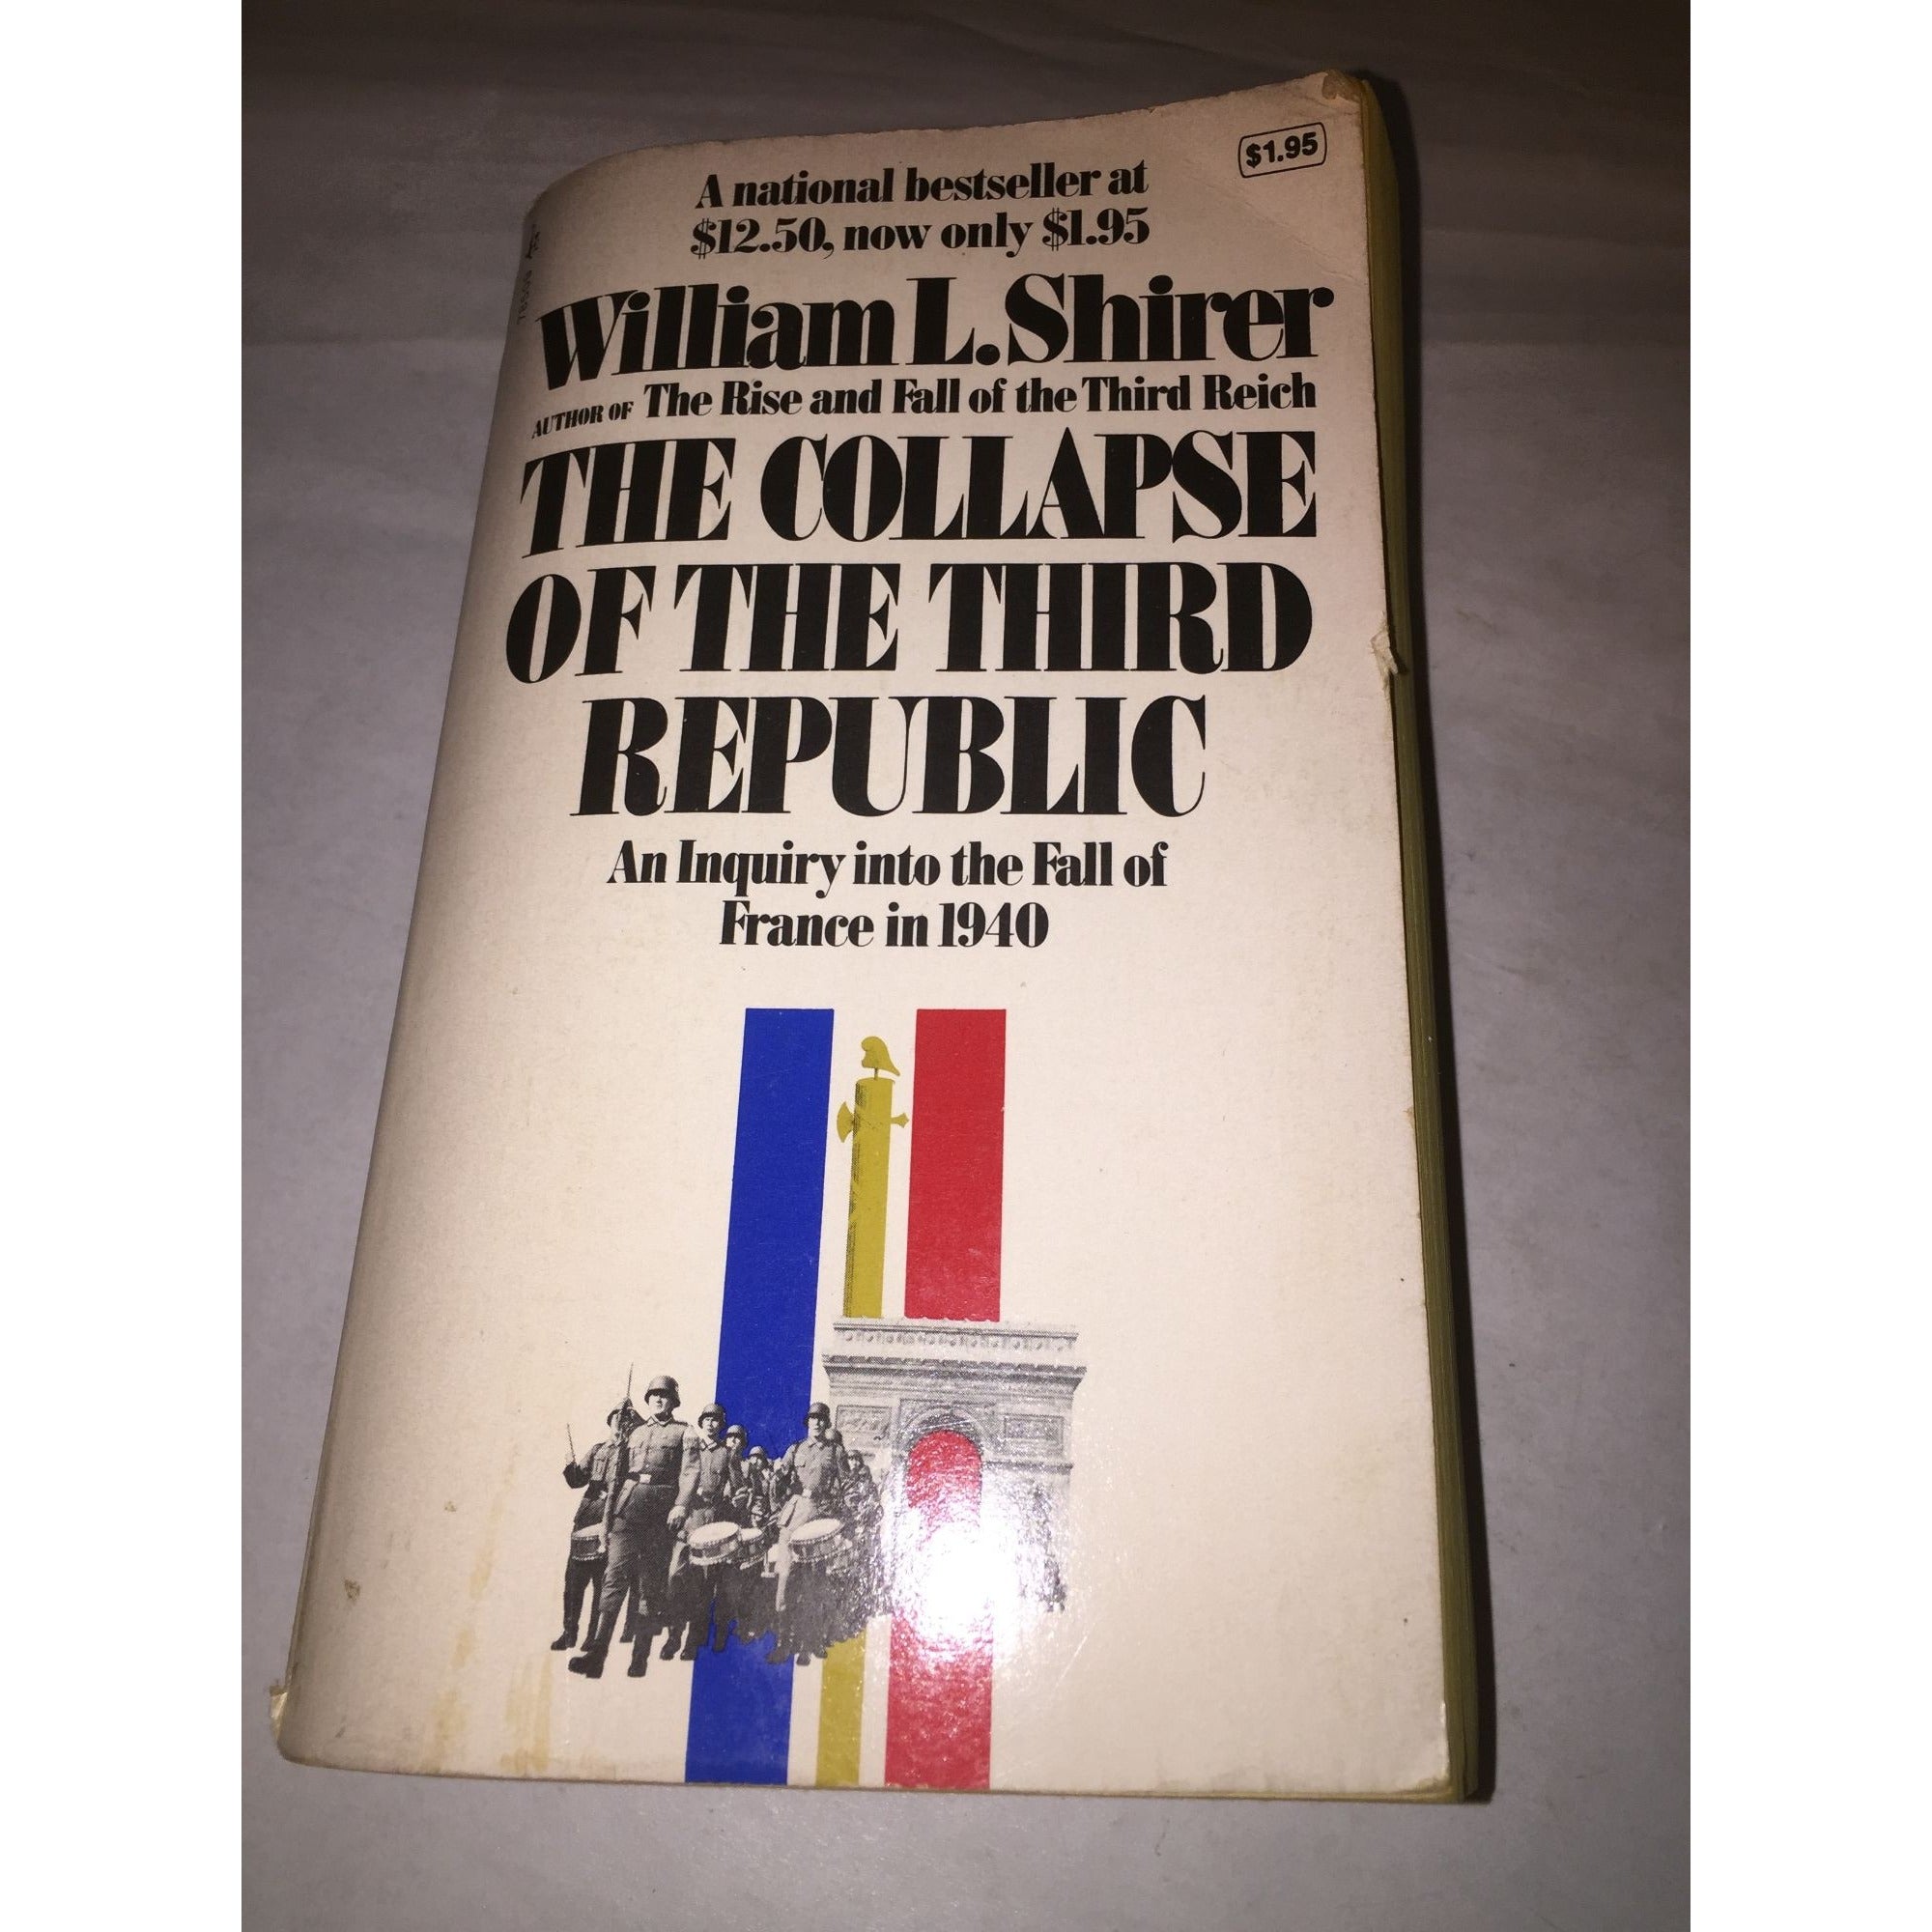 The Collapse of the Third Republic by William L. Shirer book